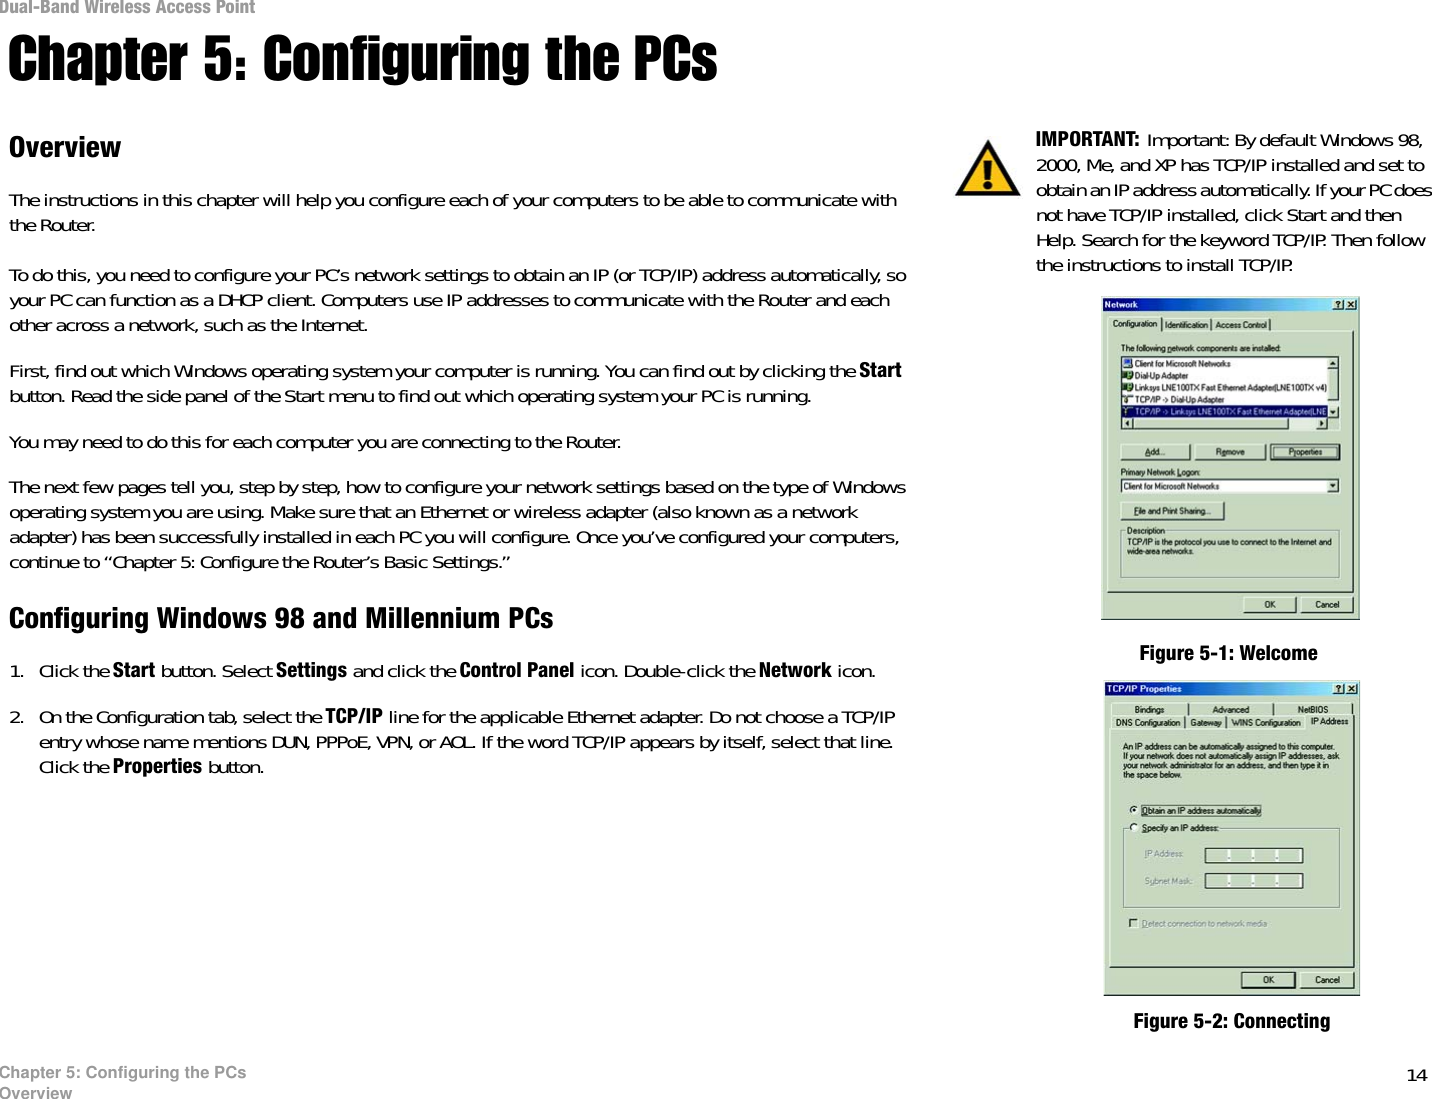 14Chapter 5: Configuring the PCsOverviewDual-Band Wireless Access PointChapter 5: Configuring the PCsOverviewThe instructions in this chapter will help you configure each of your computers to be able to communicate with the Router.To do this, you need to configure your PC’s network settings to obtain an IP (or TCP/IP) address automatically, so your PC can function as a DHCP client. Computers use IP addresses to communicate with the Router and each other across a network, such as the Internet. First, find out which Windows operating system your computer is running. You can find out by clicking the Start button. Read the side panel of the Start menu to find out which operating system your PC is running.You may need to do this for each computer you are connecting to the Router.The next few pages tell you, step by step, how to configure your network settings based on the type of Windows operating system you are using. Make sure that an Ethernet or wireless adapter (also known as a network adapter) has been successfully installed in each PC you will configure. Once you’ve configured your computers, continue to “Chapter 5: Configure the Router’s Basic Settings.”Configuring Windows 98 and Millennium PCs1. Click the Start button. Select Settings and click the Control Panel icon. Double-click the Network icon.2. On the Configuration tab, select the TCP/IP line for the applicable Ethernet adapter. Do not choose a TCP/IP entry whose name mentions DUN, PPPoE, VPN, or AOL. If the word TCP/IP appears by itself, select that line. Click the Properties button. IMPORTANT: Important: By default Windows 98, 2000, Me, and XP has TCP/IP installed and set to obtain an IP address automatically. If your PC does not have TCP/IP installed, click Start and then Help. Search for the keyword TCP/IP. Then follow the instructions to install TCP/IP.Figure 5-1: WelcomeFigure 5-2: Connecting